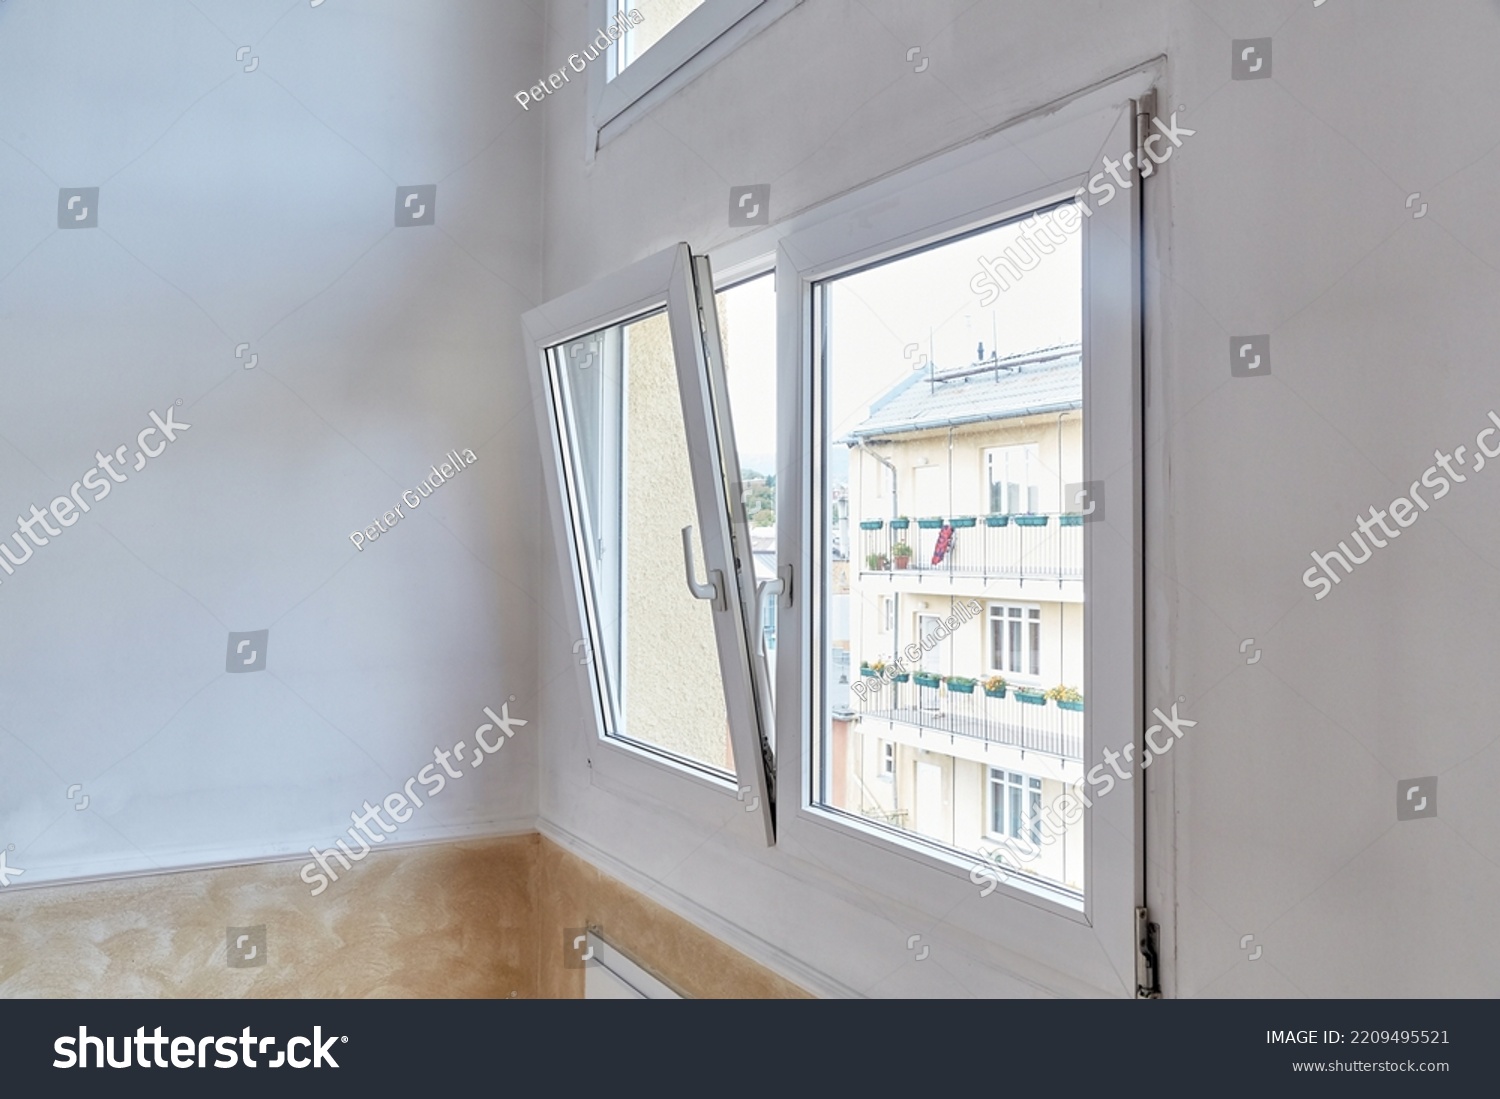 Window tilt open in a city apartment, letting in fresh air #2209495521